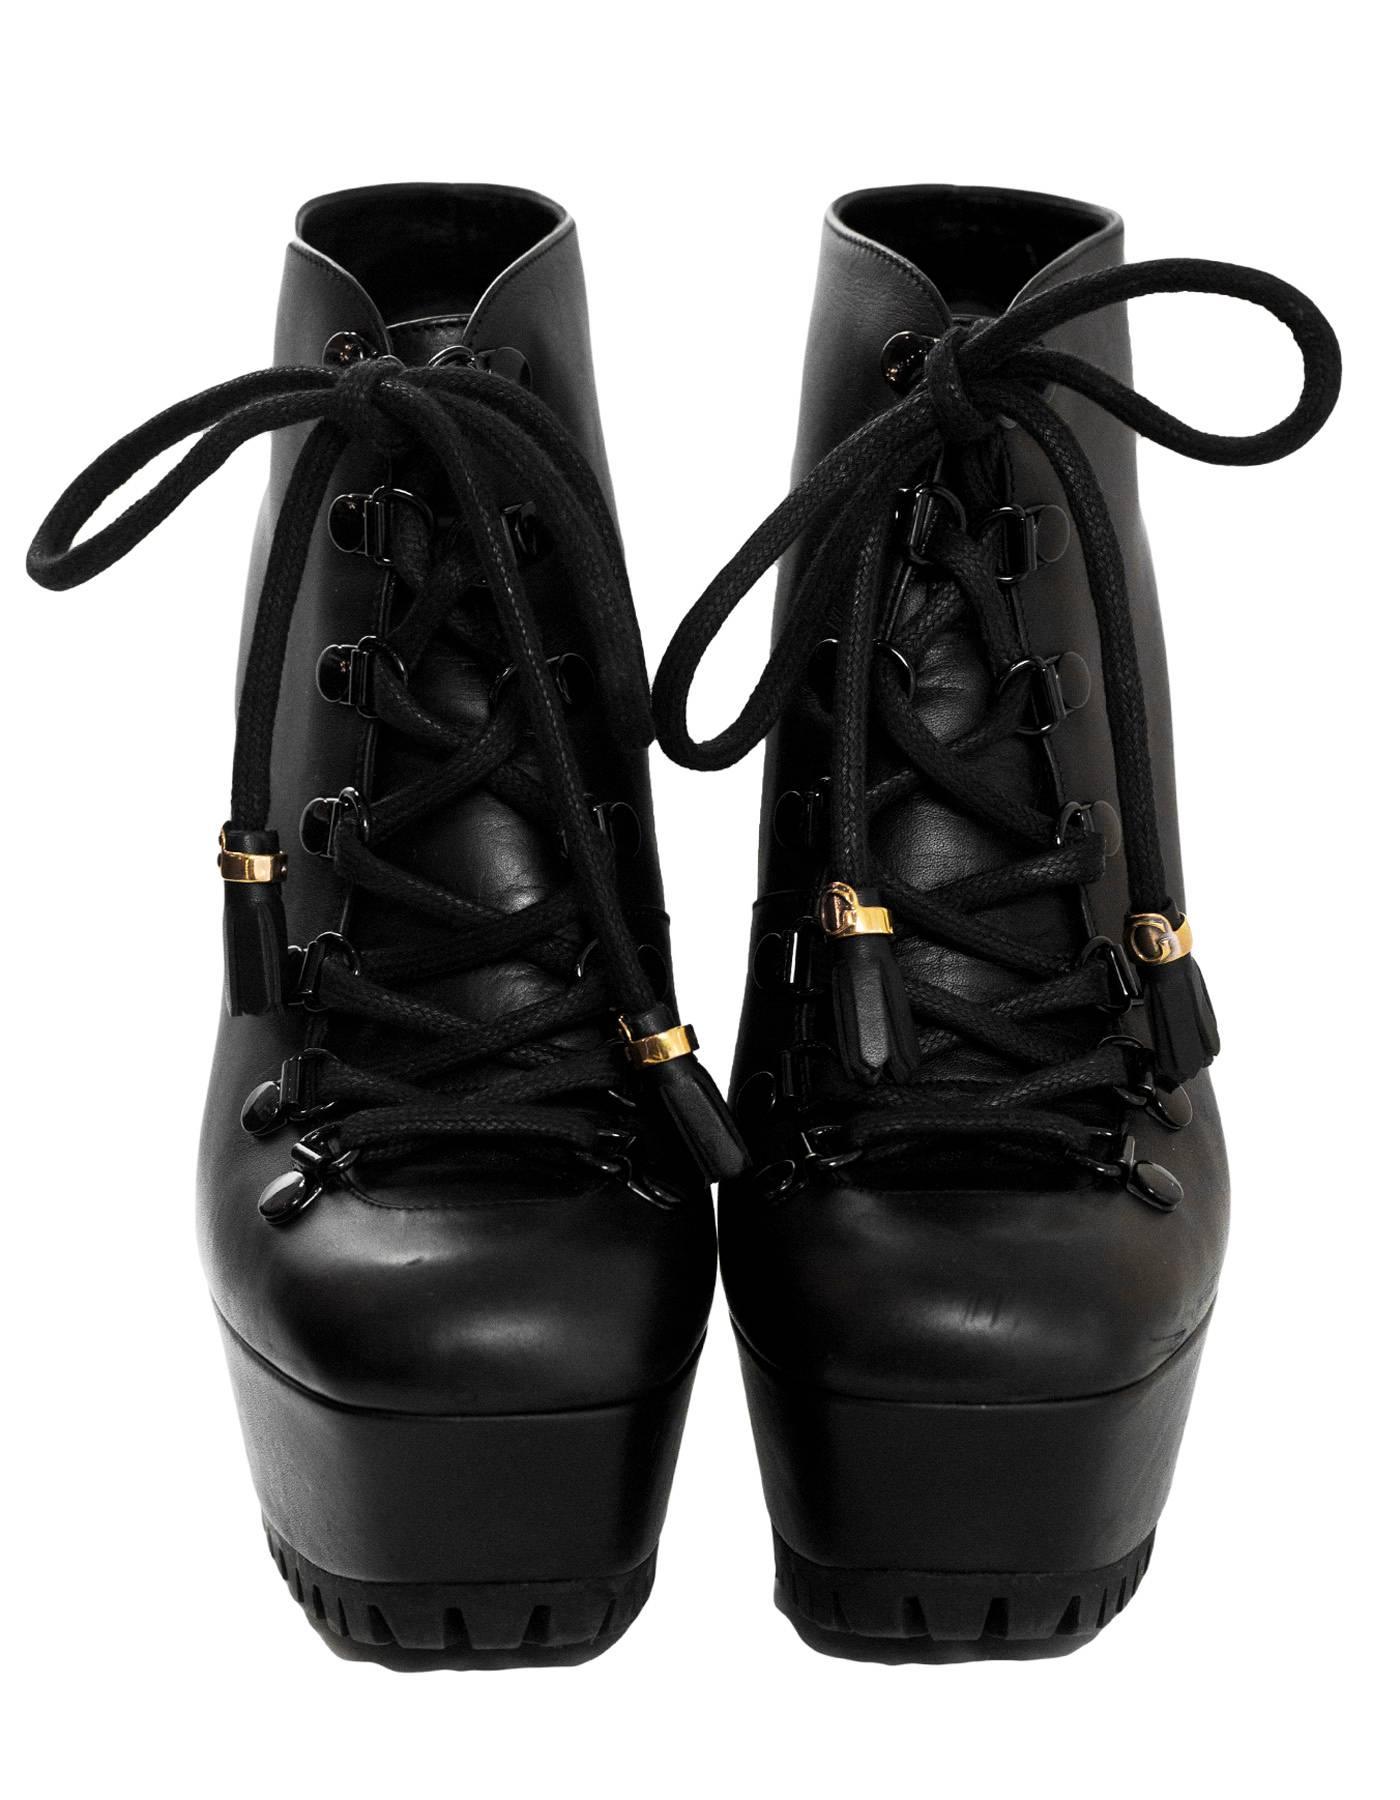 Gucci Black Leather Kayla Lace-Up Ankle Boots Sz 37

Made In: Italy
Color: Black
Materials: Leather
Closure/Opening: Lace tie closure
Sole Stamp: Gucci Made in Italy 37
Retail Price: $1,195 + Tax
Overall Condition: Excellent pre-owned condition with